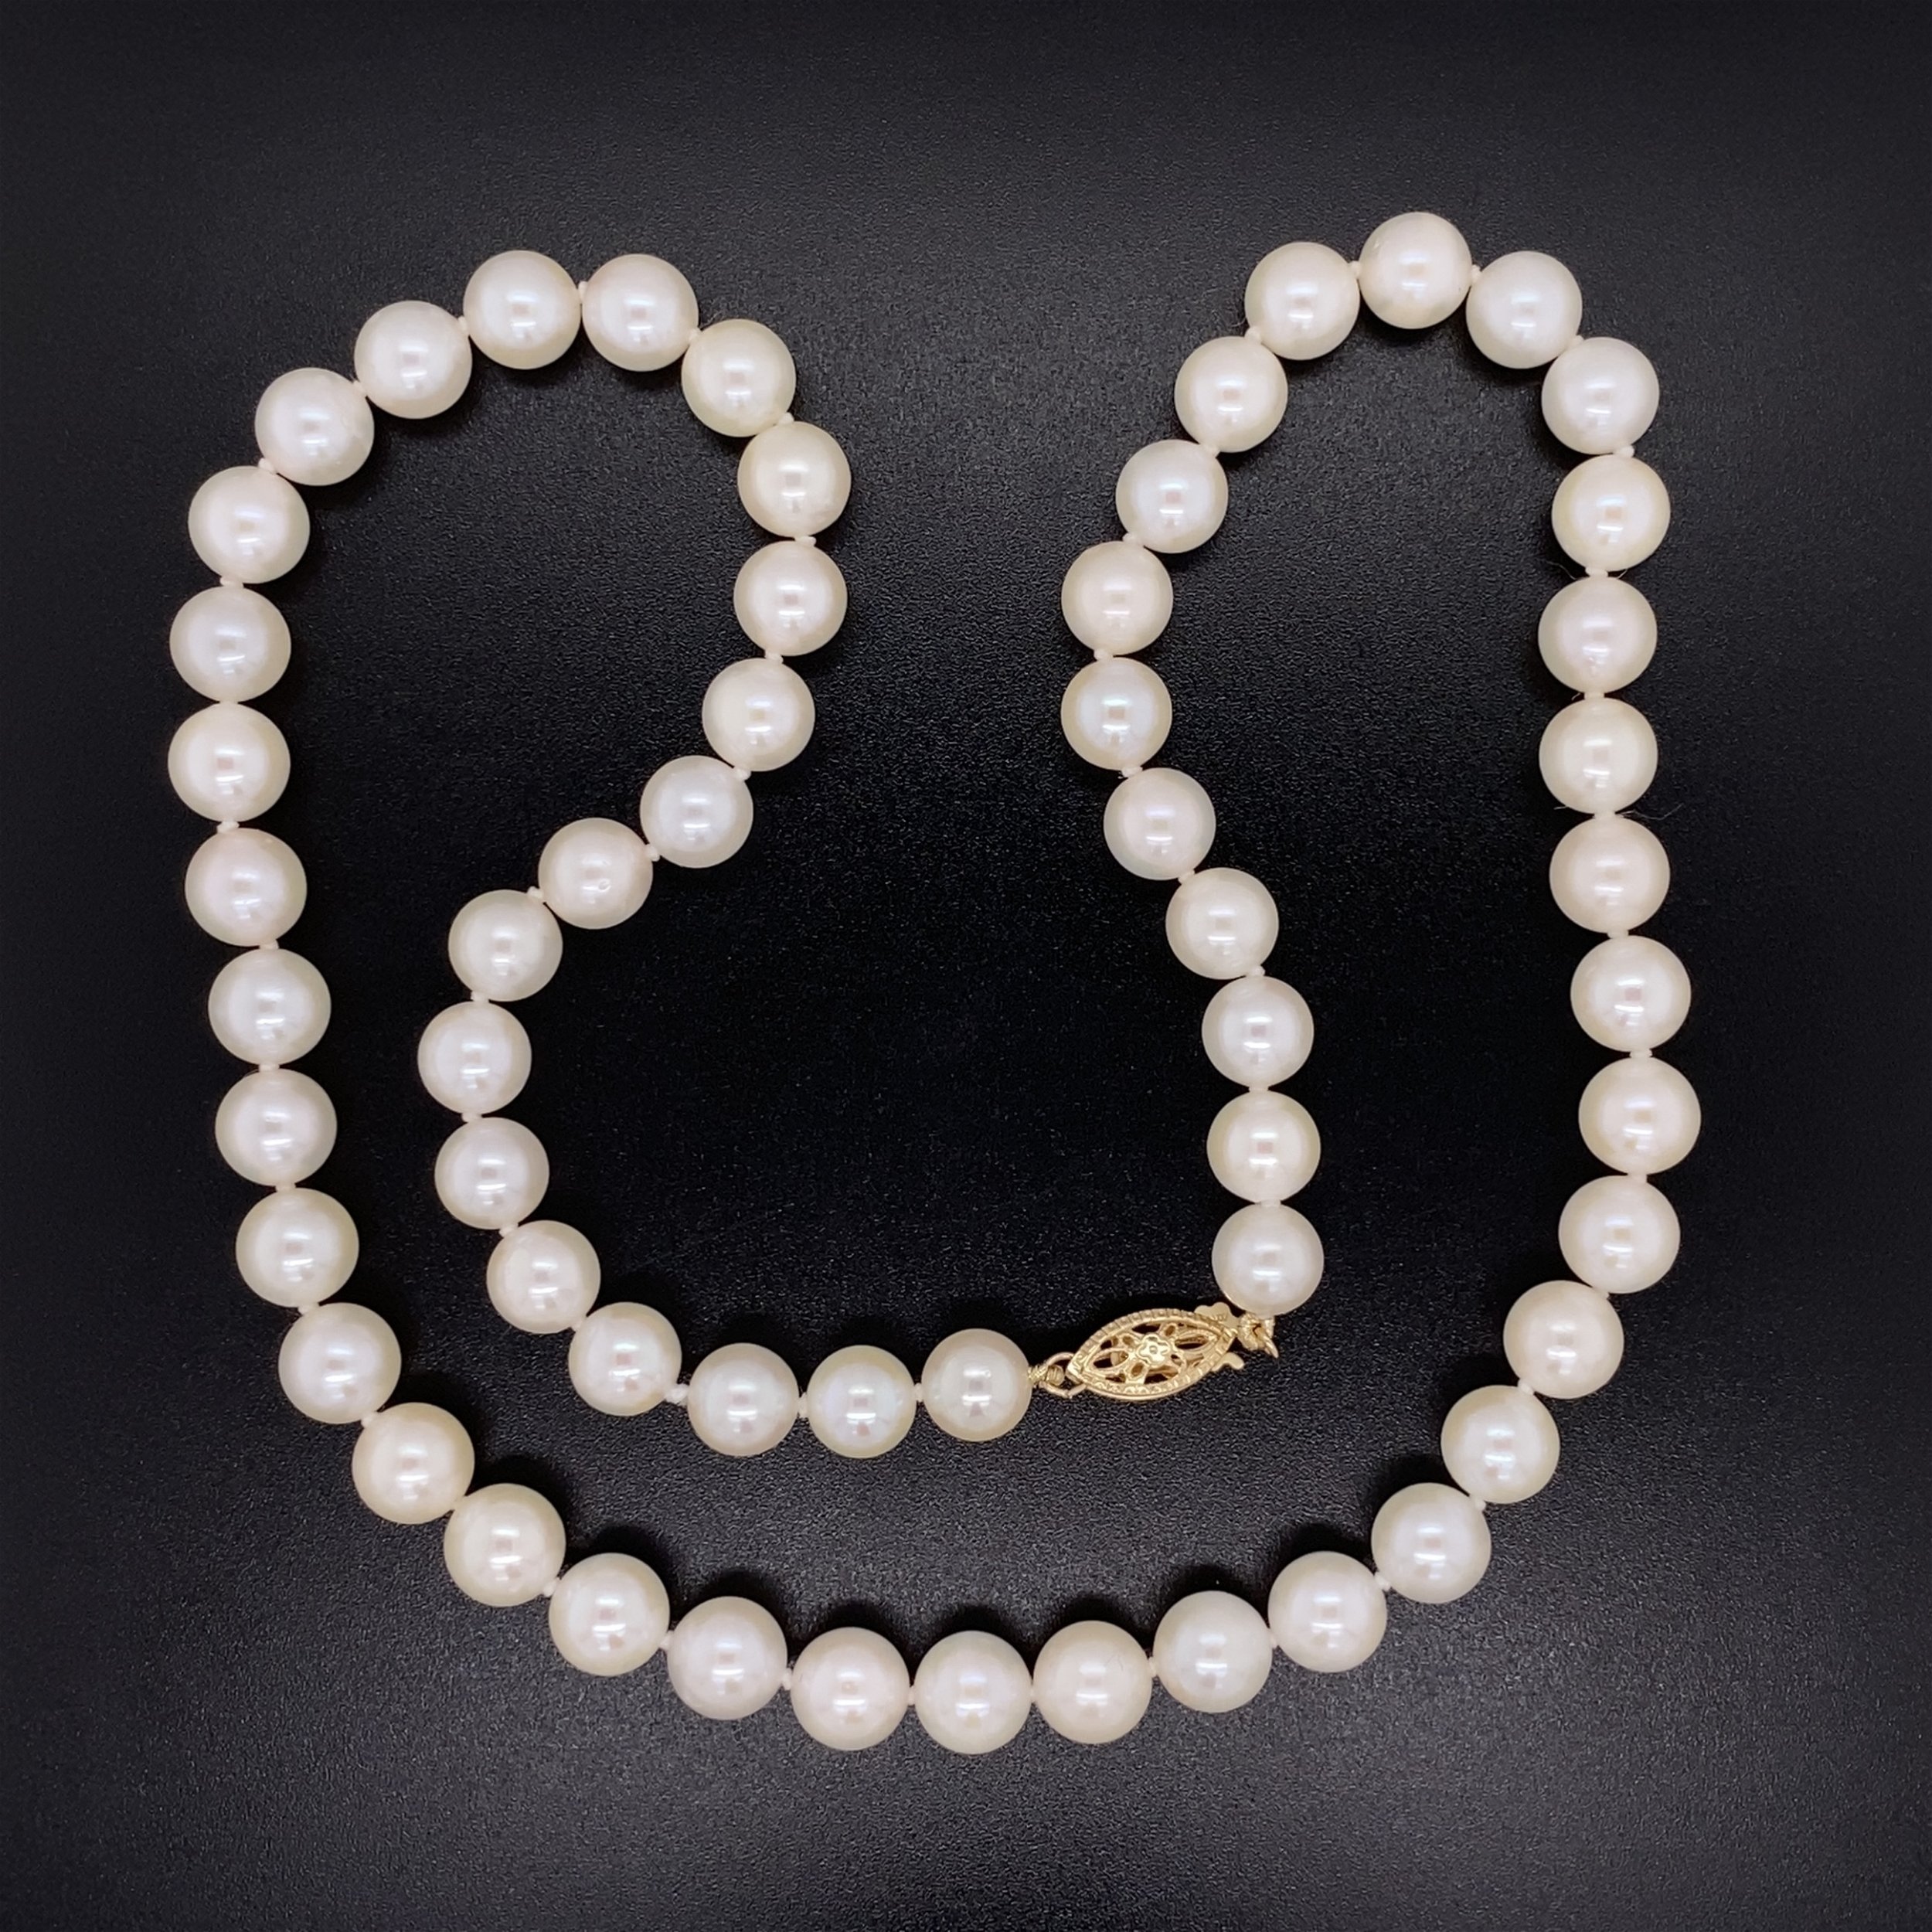 14K YG 7mm Freshwater White Pearl Necklace, 18"